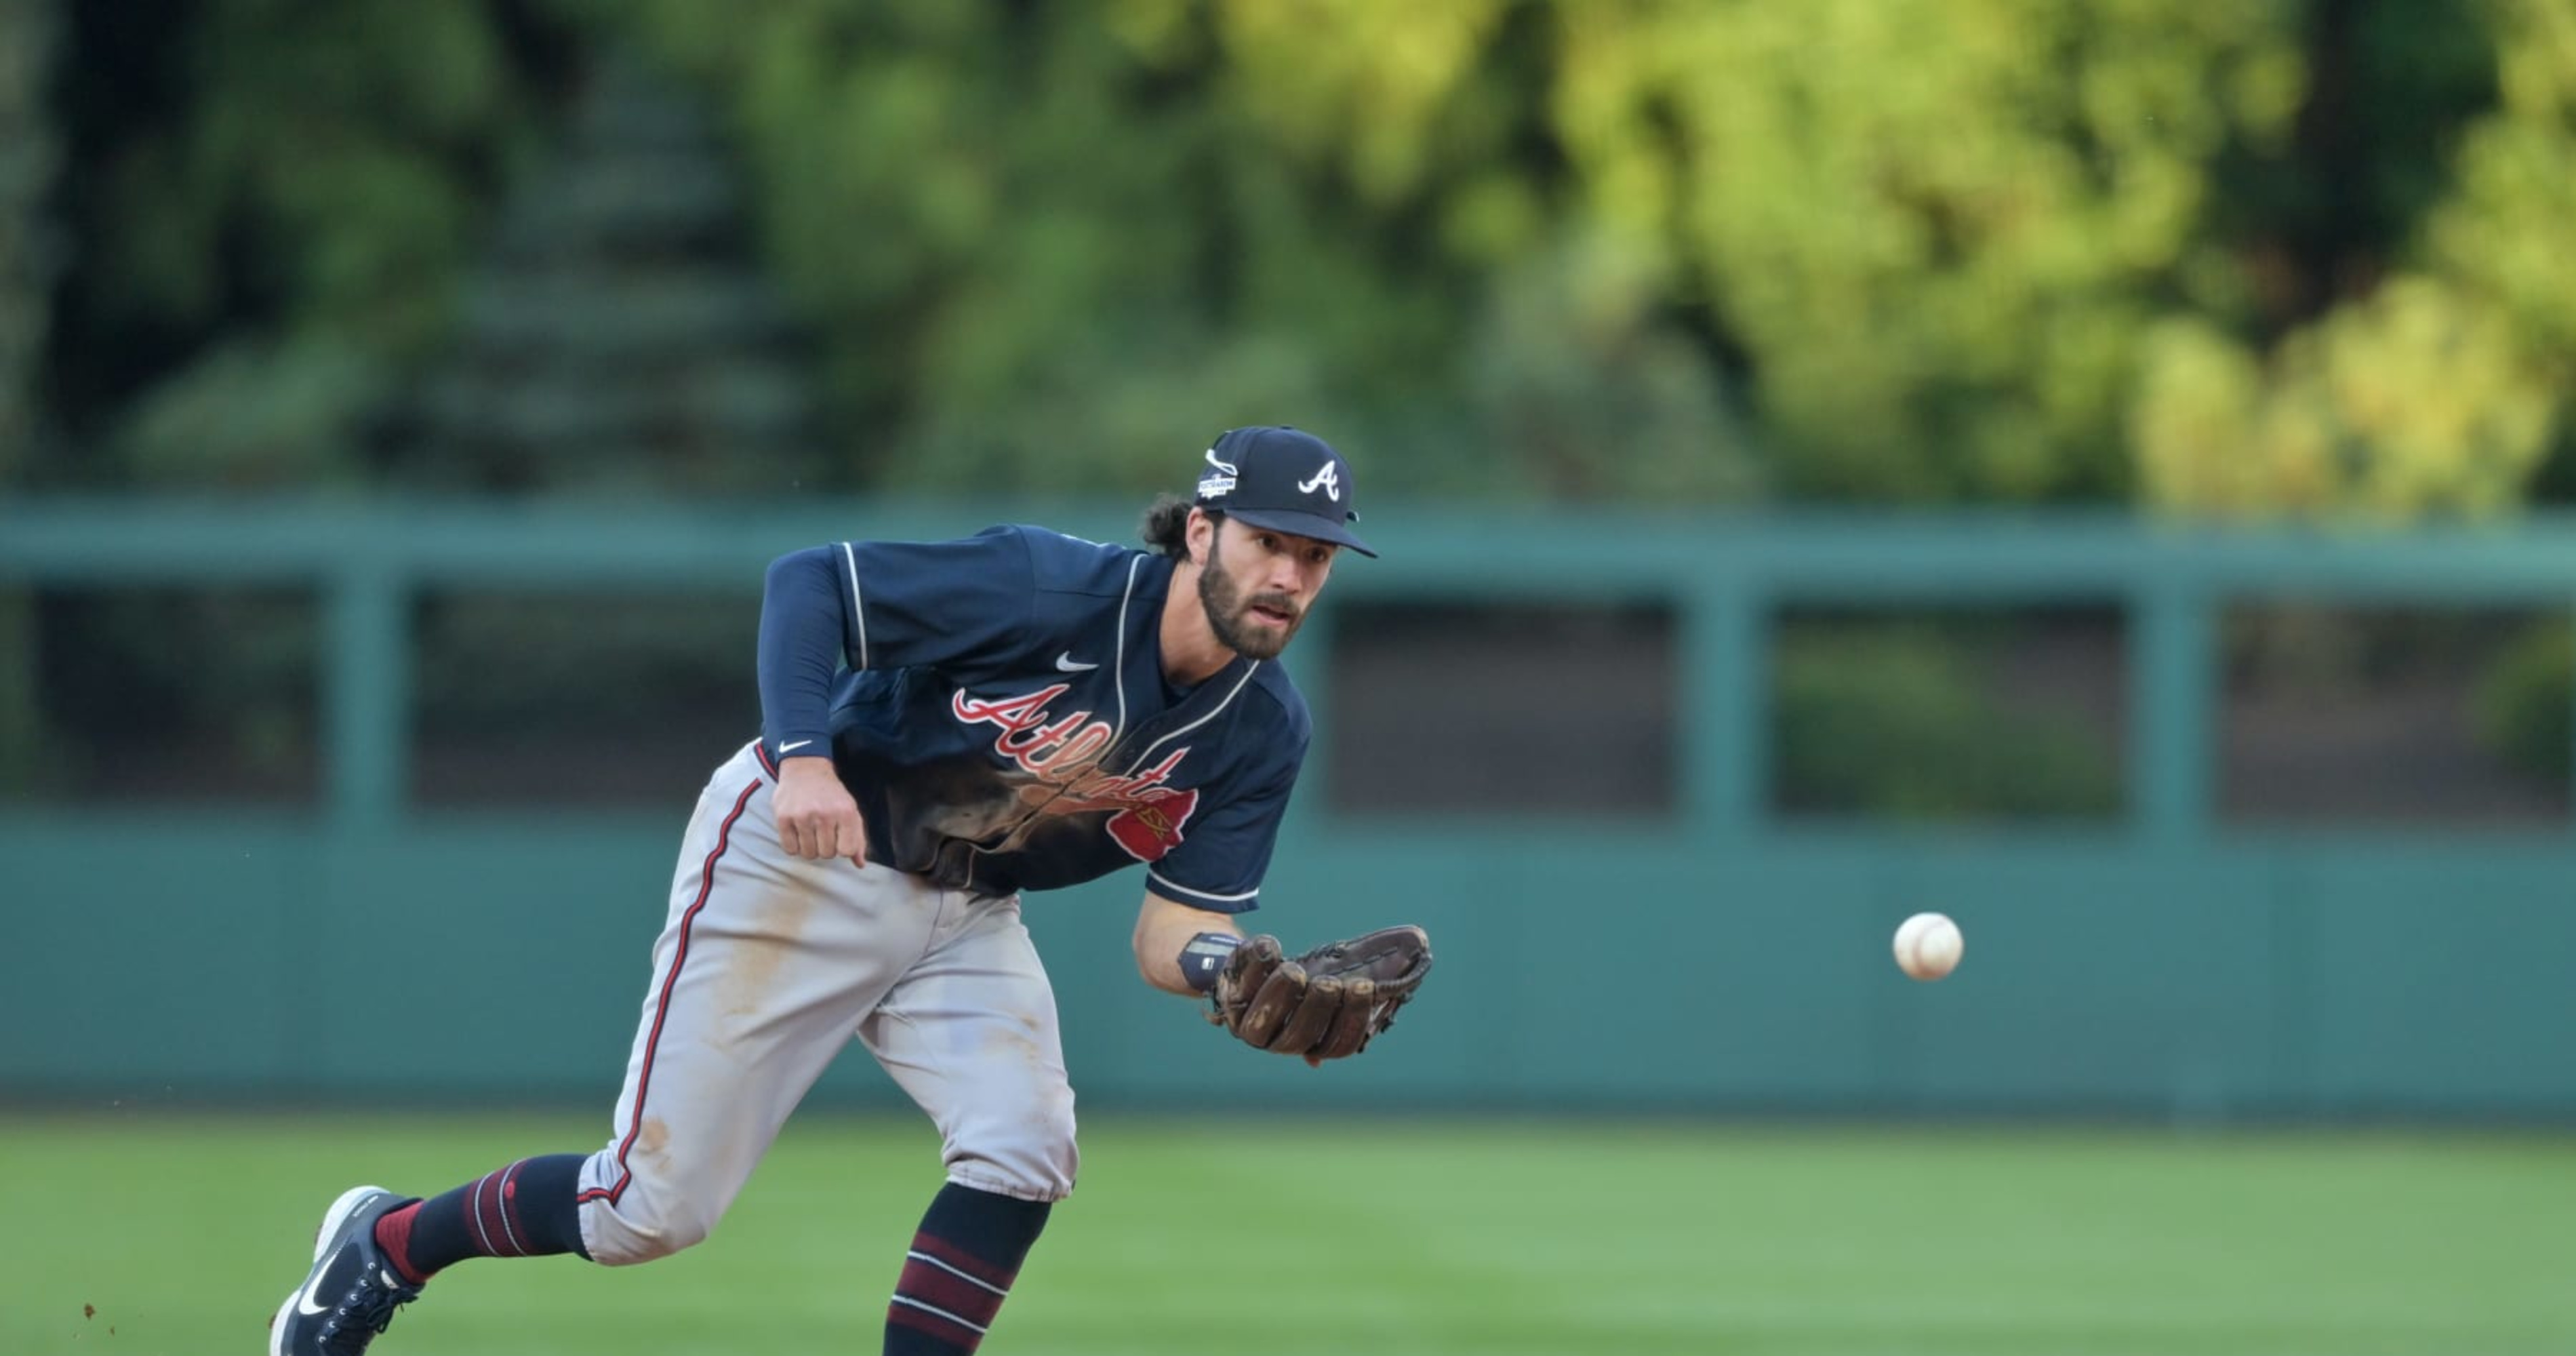 Cubs view Dansby Swanson as most realistic shortstop target